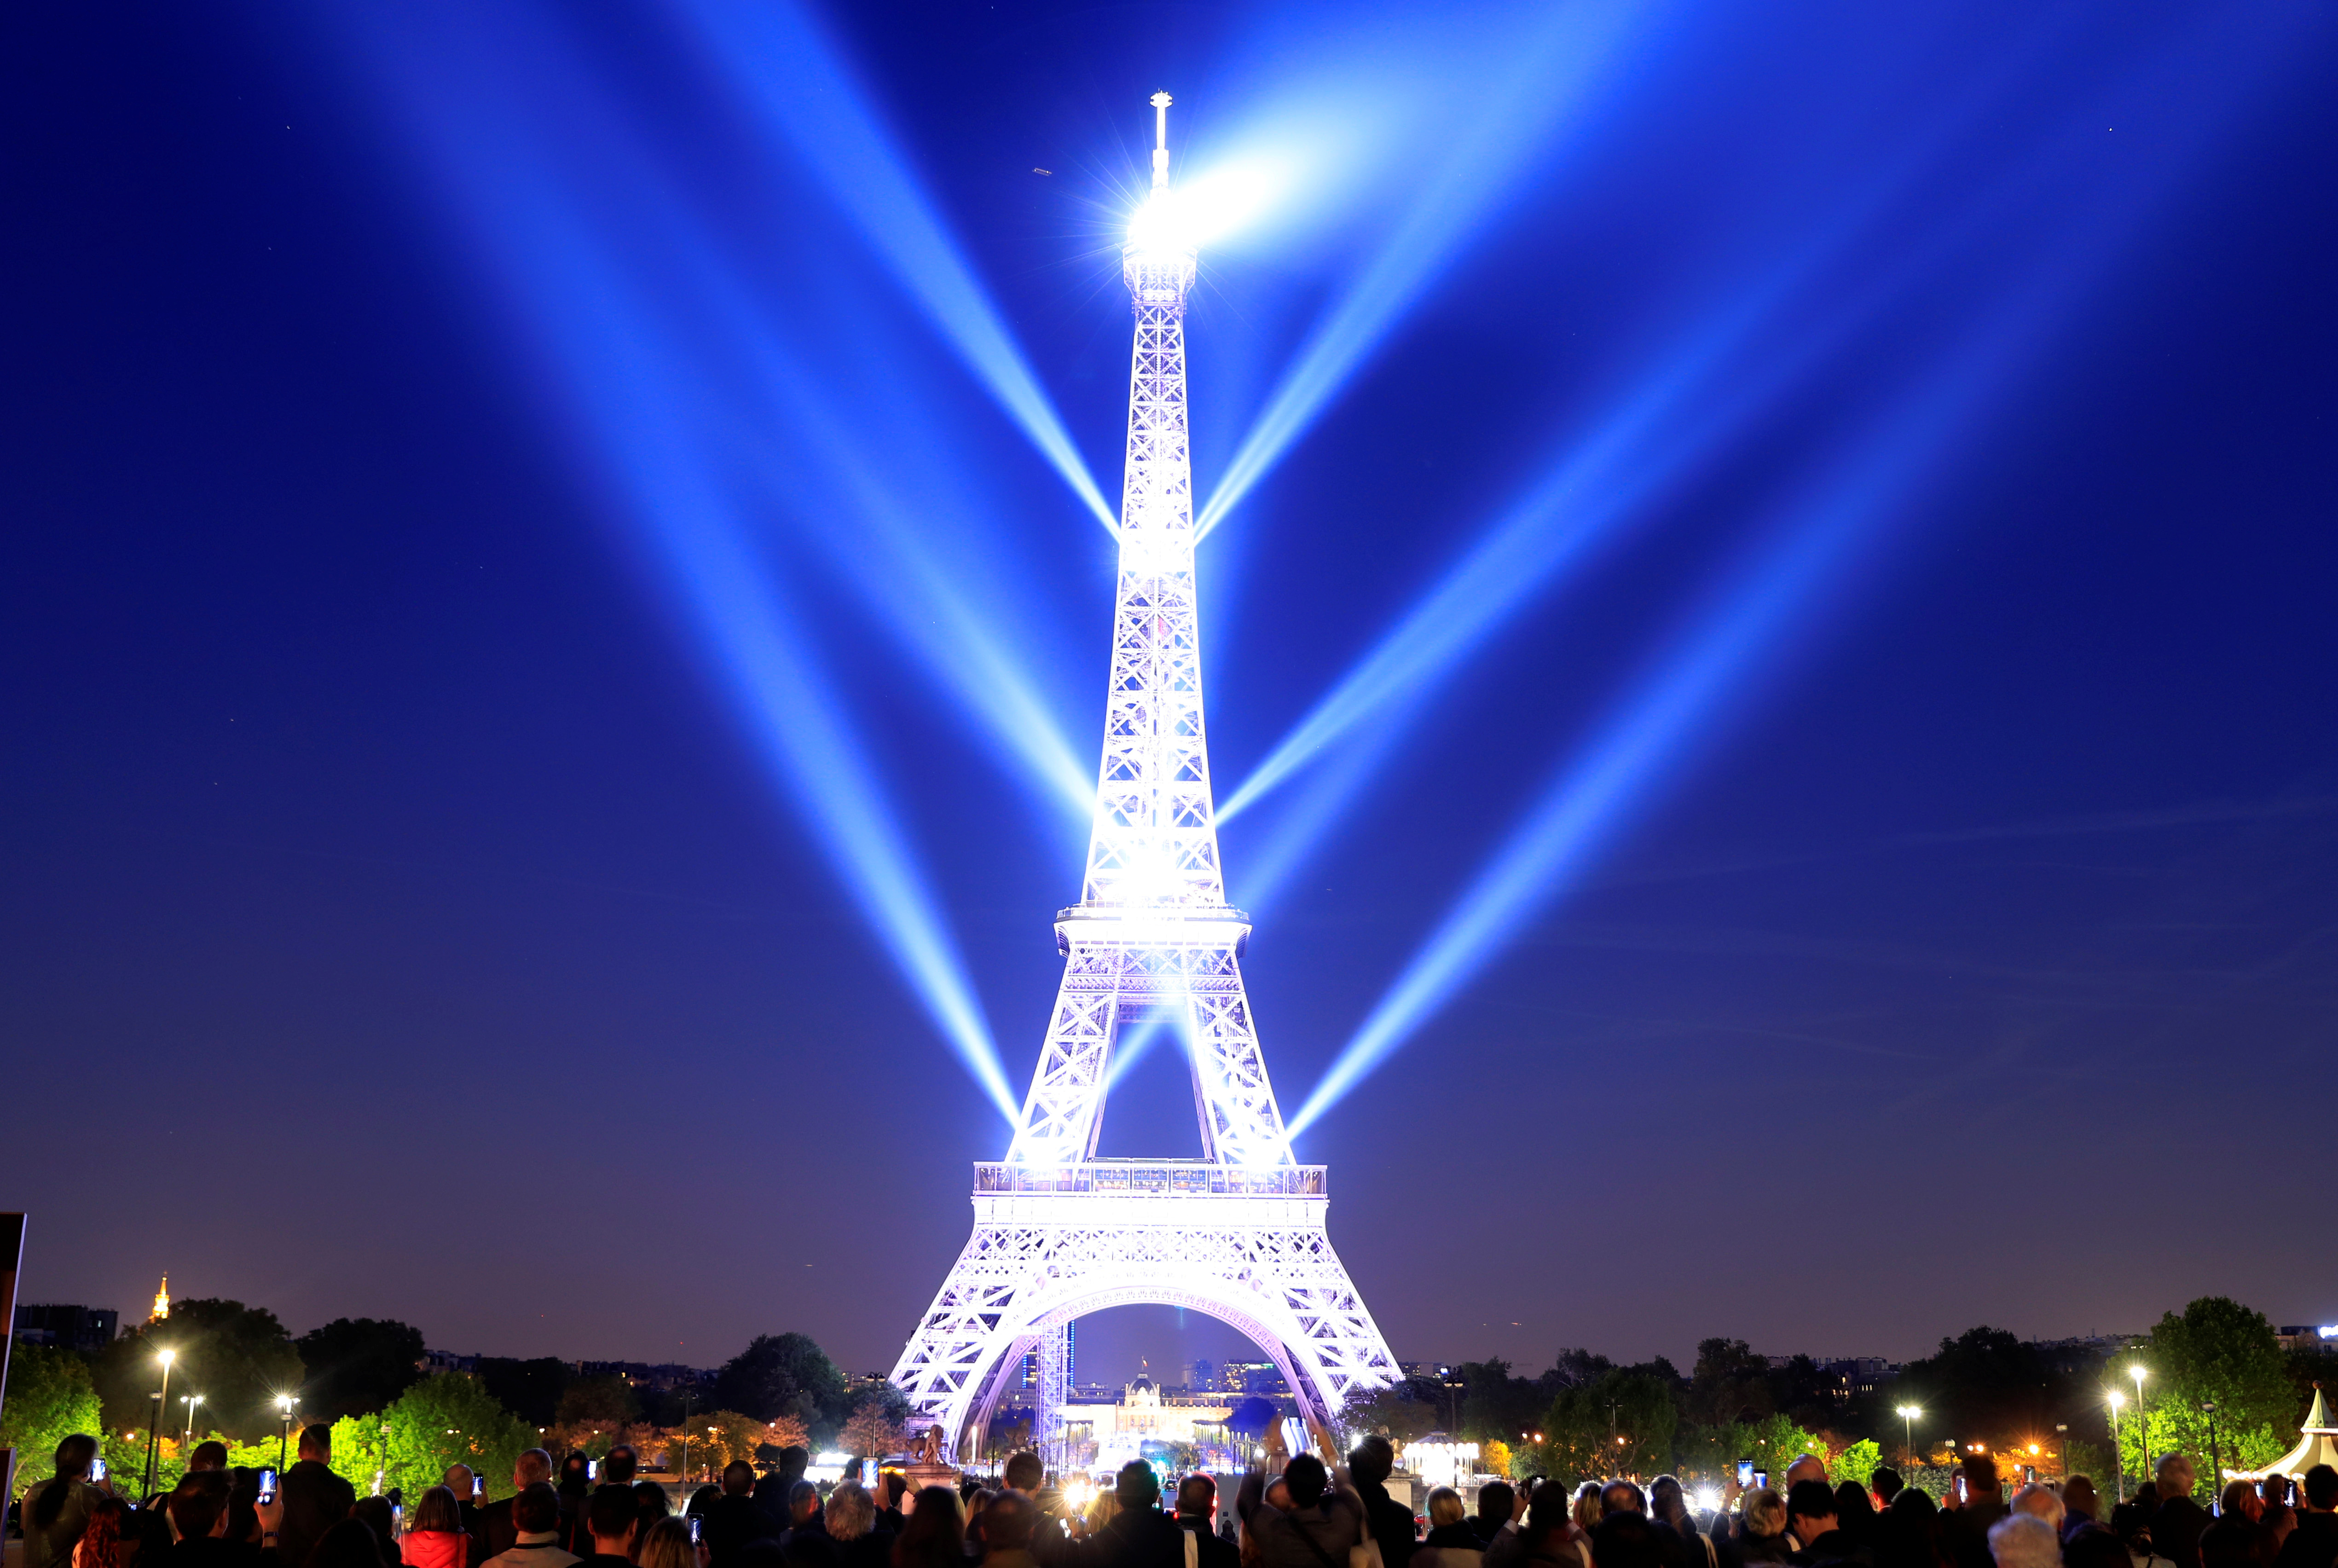 eiffel tower at night with lights